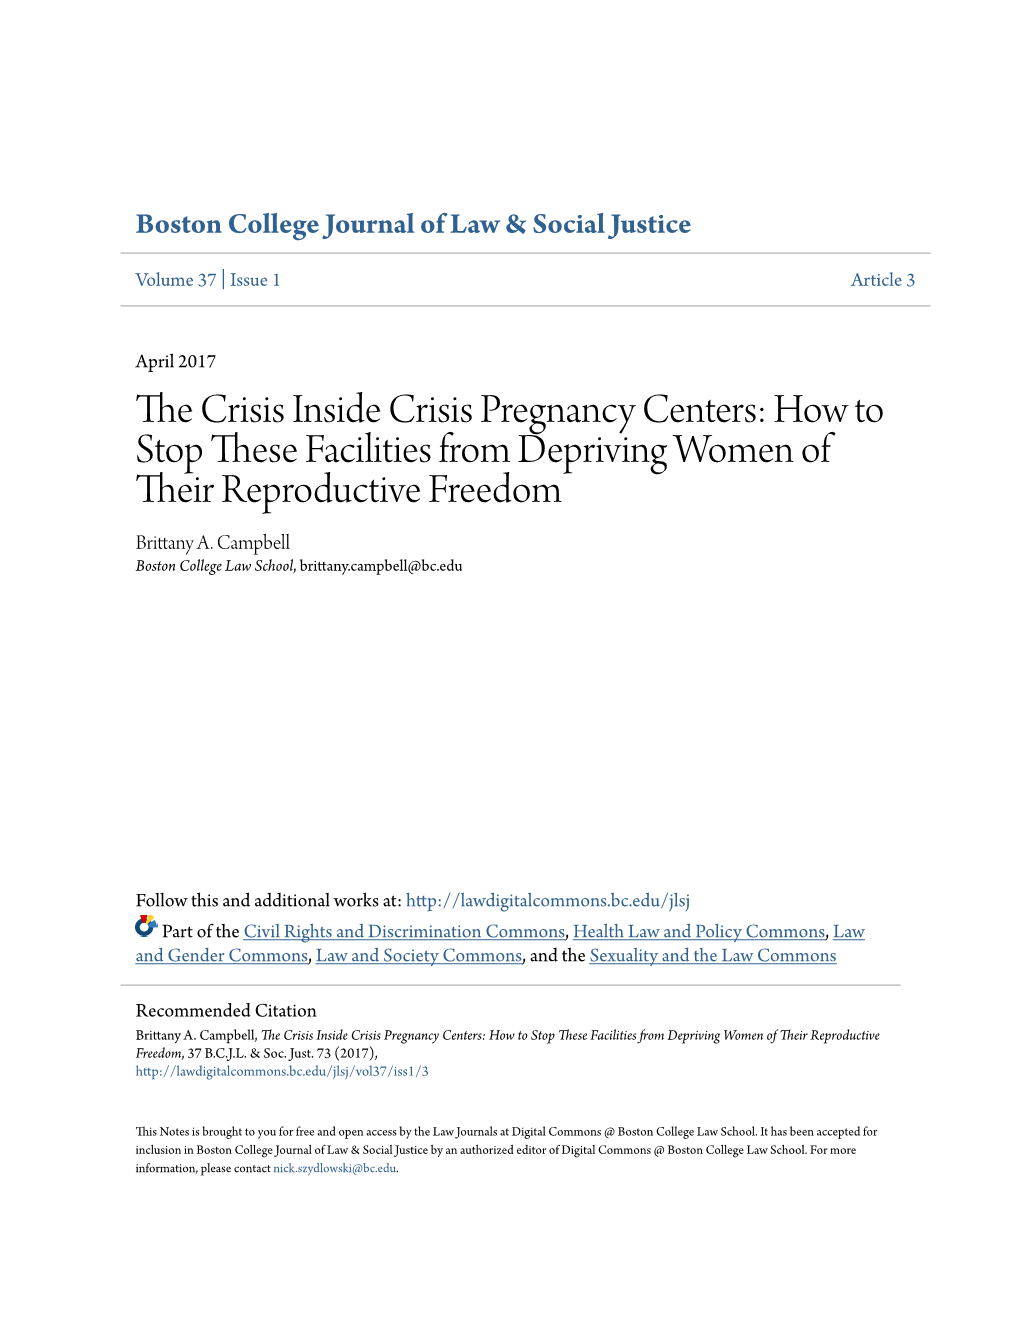 The Crisis Inside Crisis Pregnancy Centers: How to Stop These Facilities from Depriving Women of Their Reproductive Freedom, 37 B.C.J.L